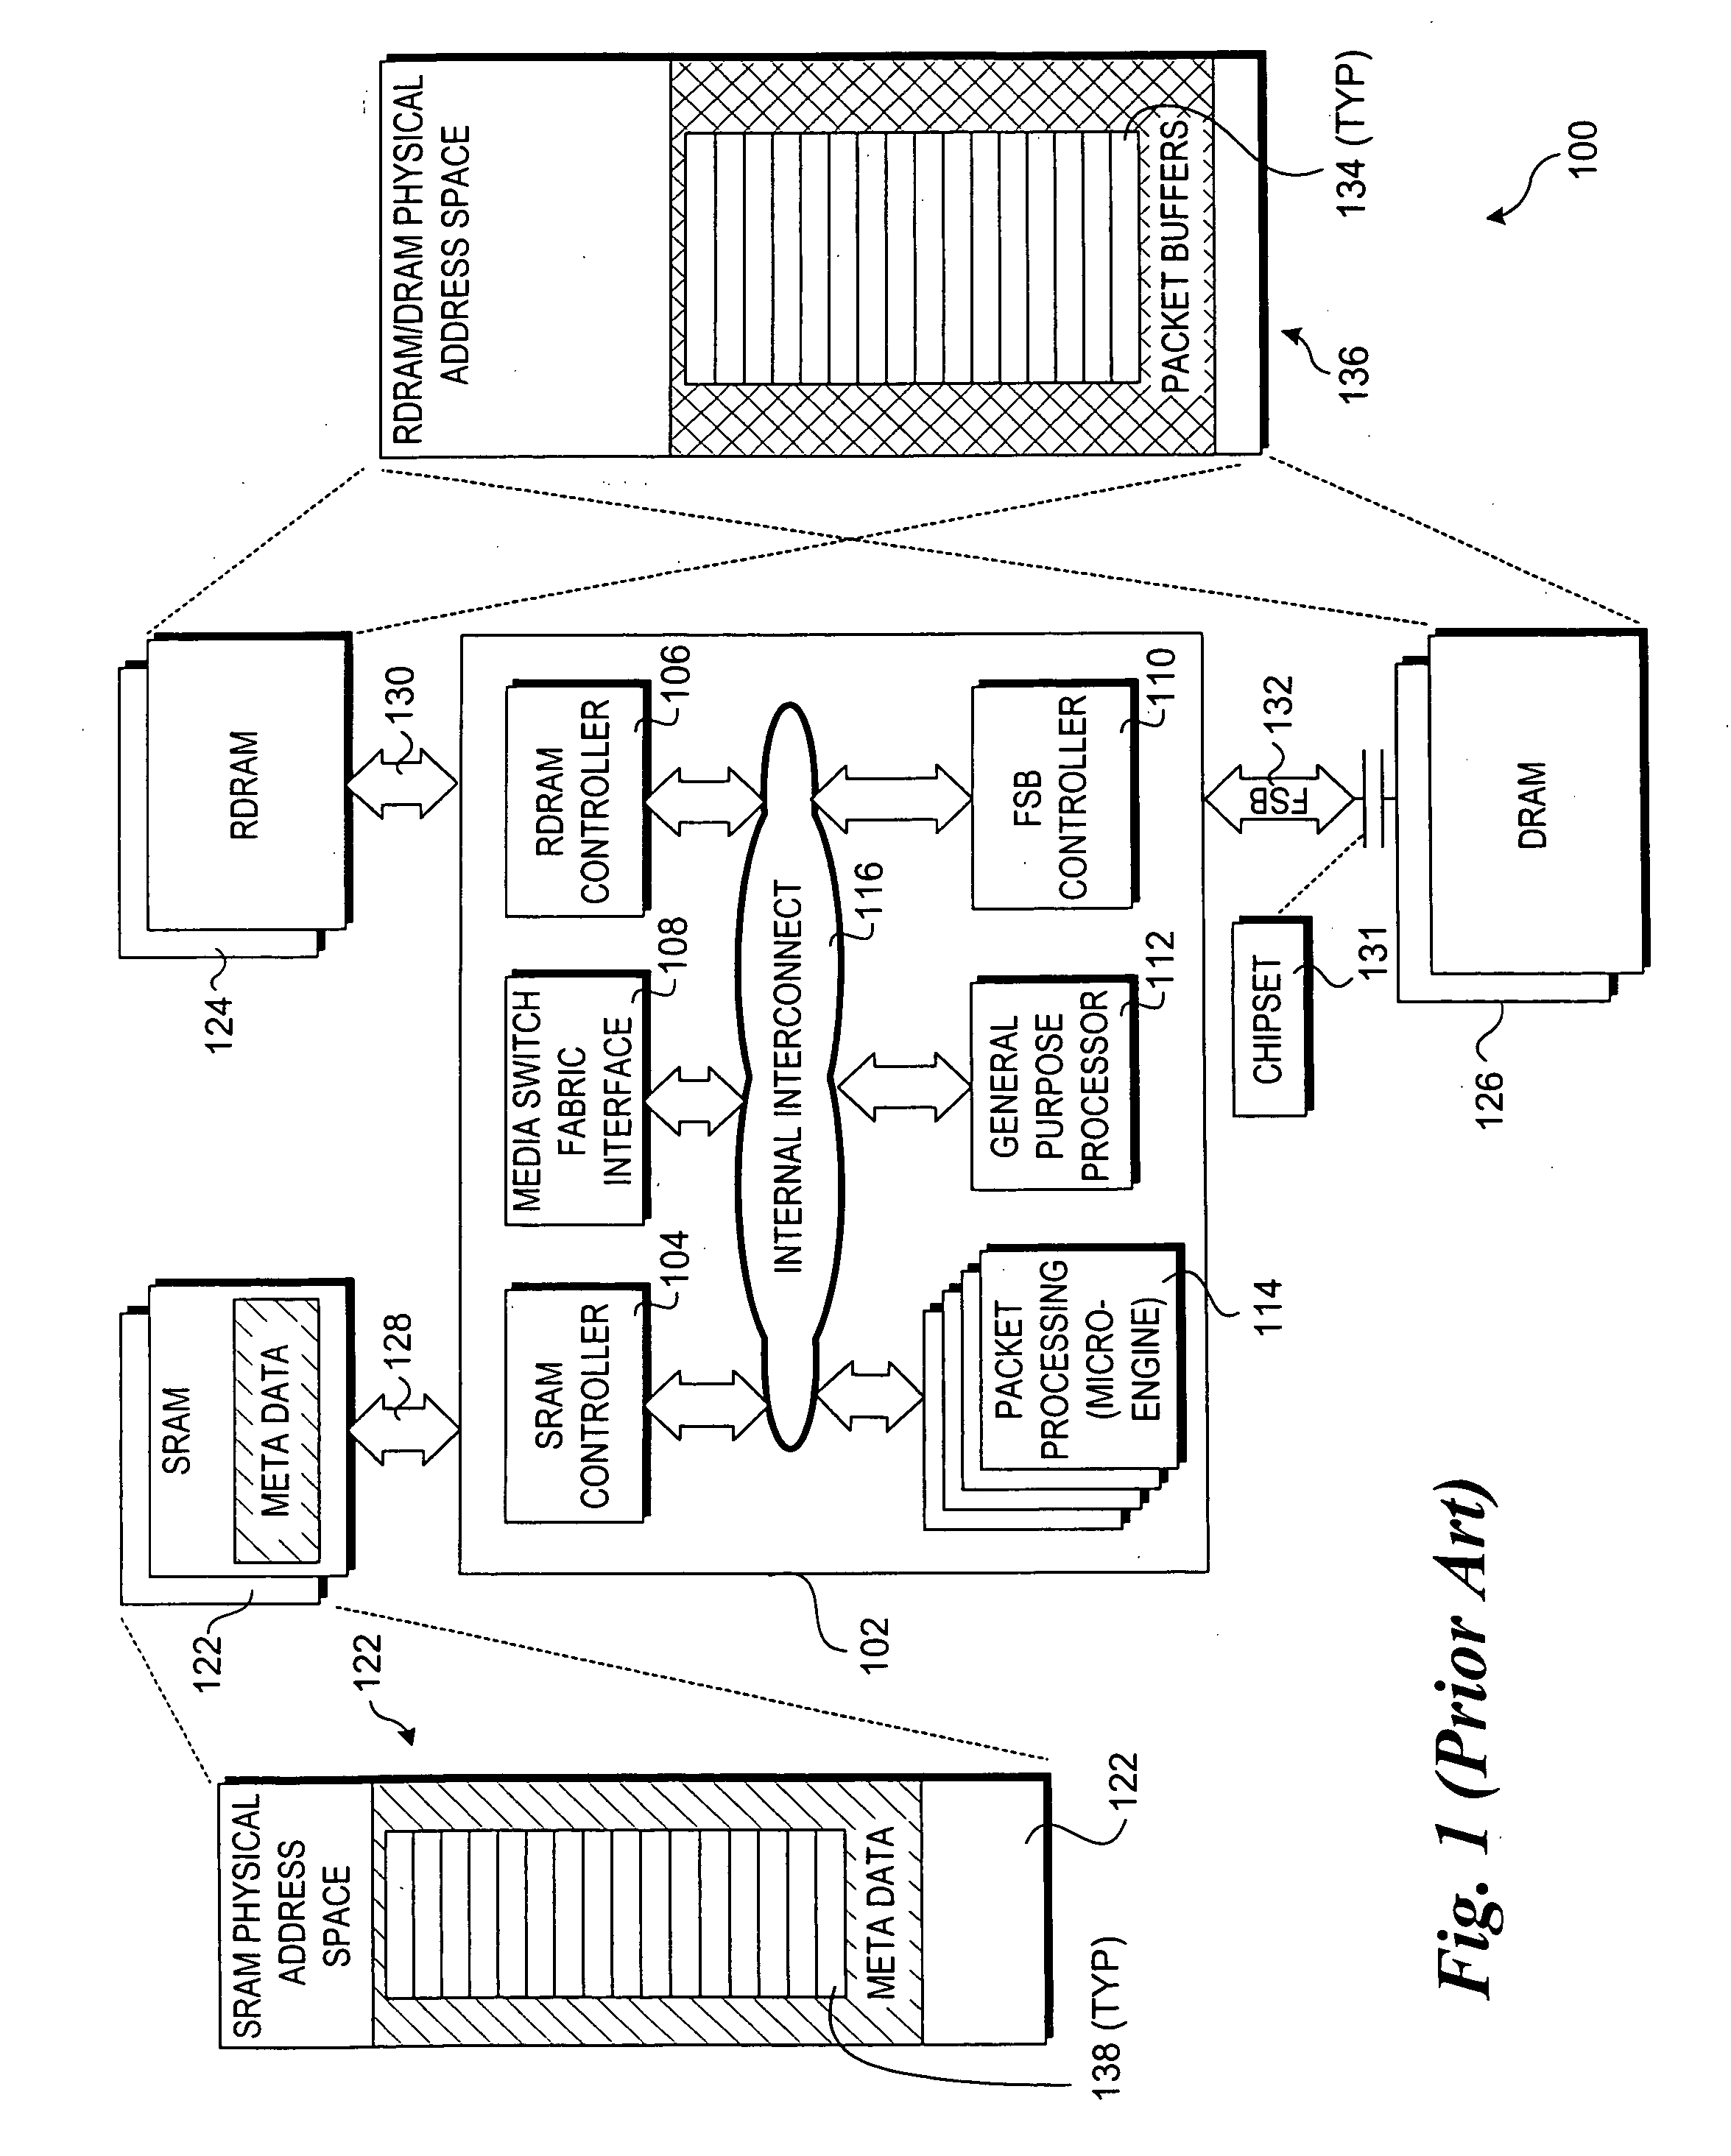 Buffer management in a network device without SRAM